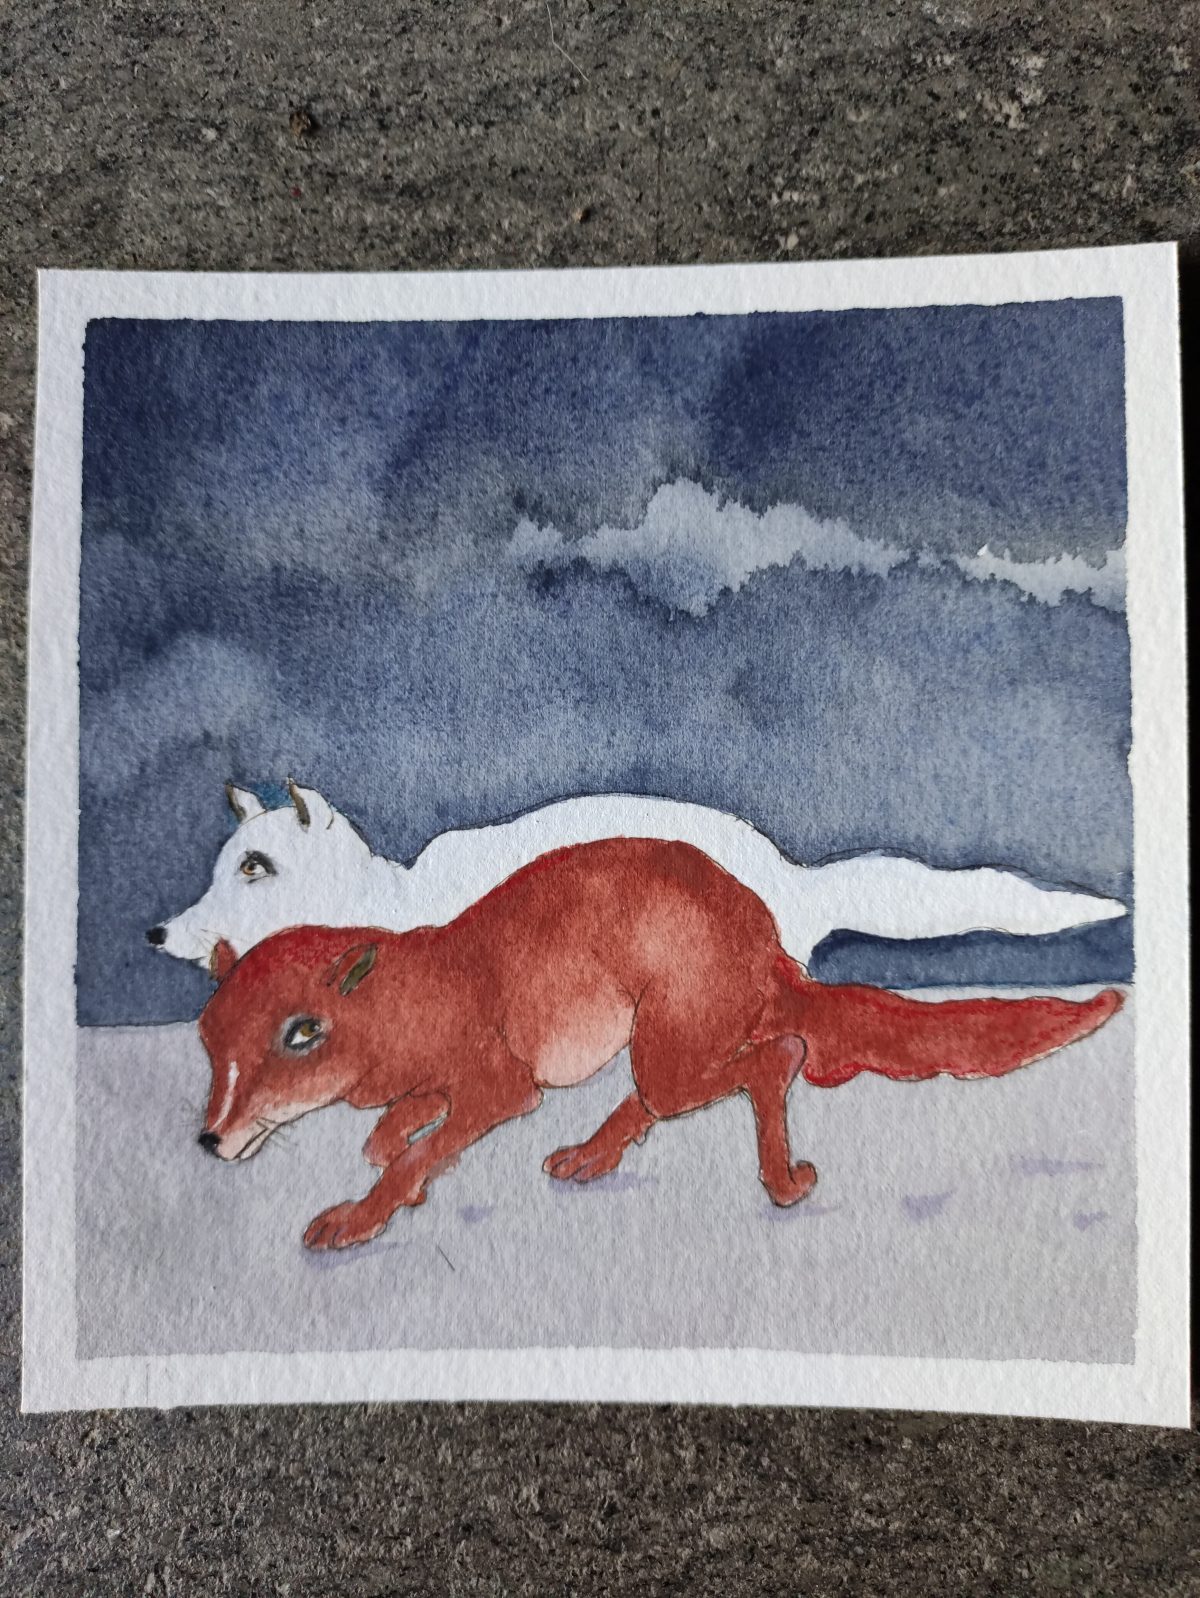 JUDITH-LANGE-ARCTIC-FOXES-FEEL-COLD-IN-THSI-HEAT